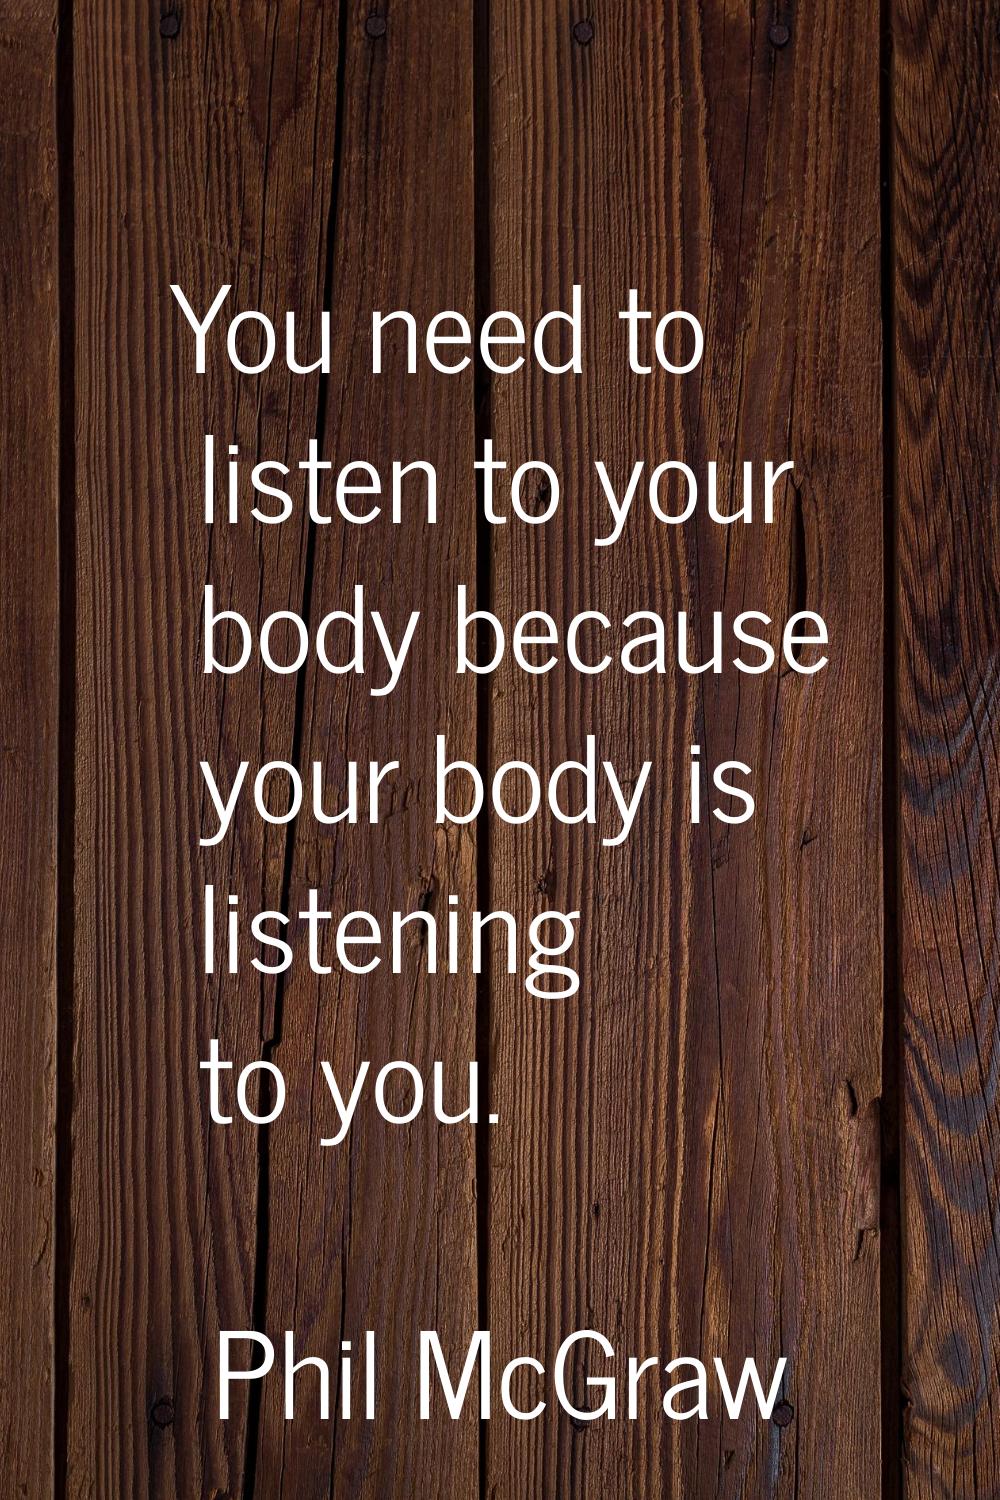 You need to listen to your body because your body is listening to you.